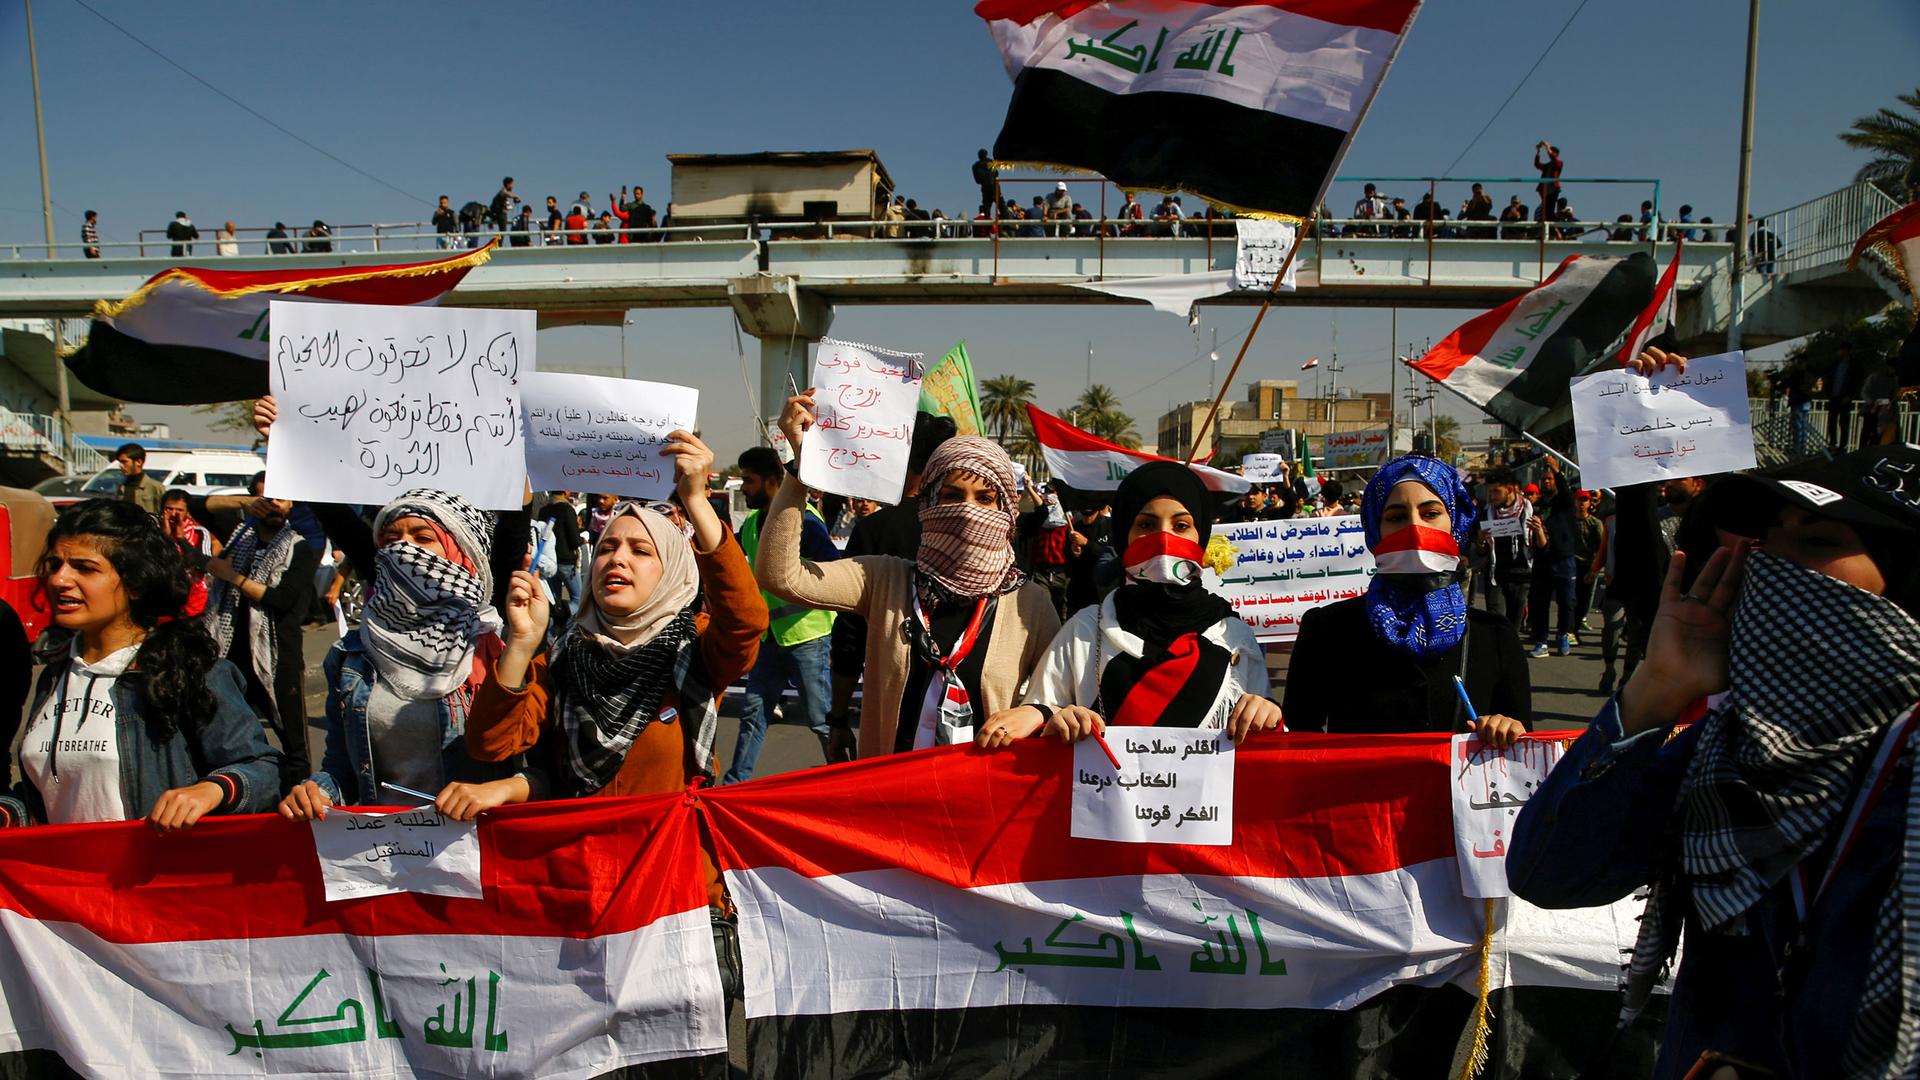 University students hold banners as they gather during ongoing anti-government protests in Baghdad, Iraq, Feb. 6, 2020. 